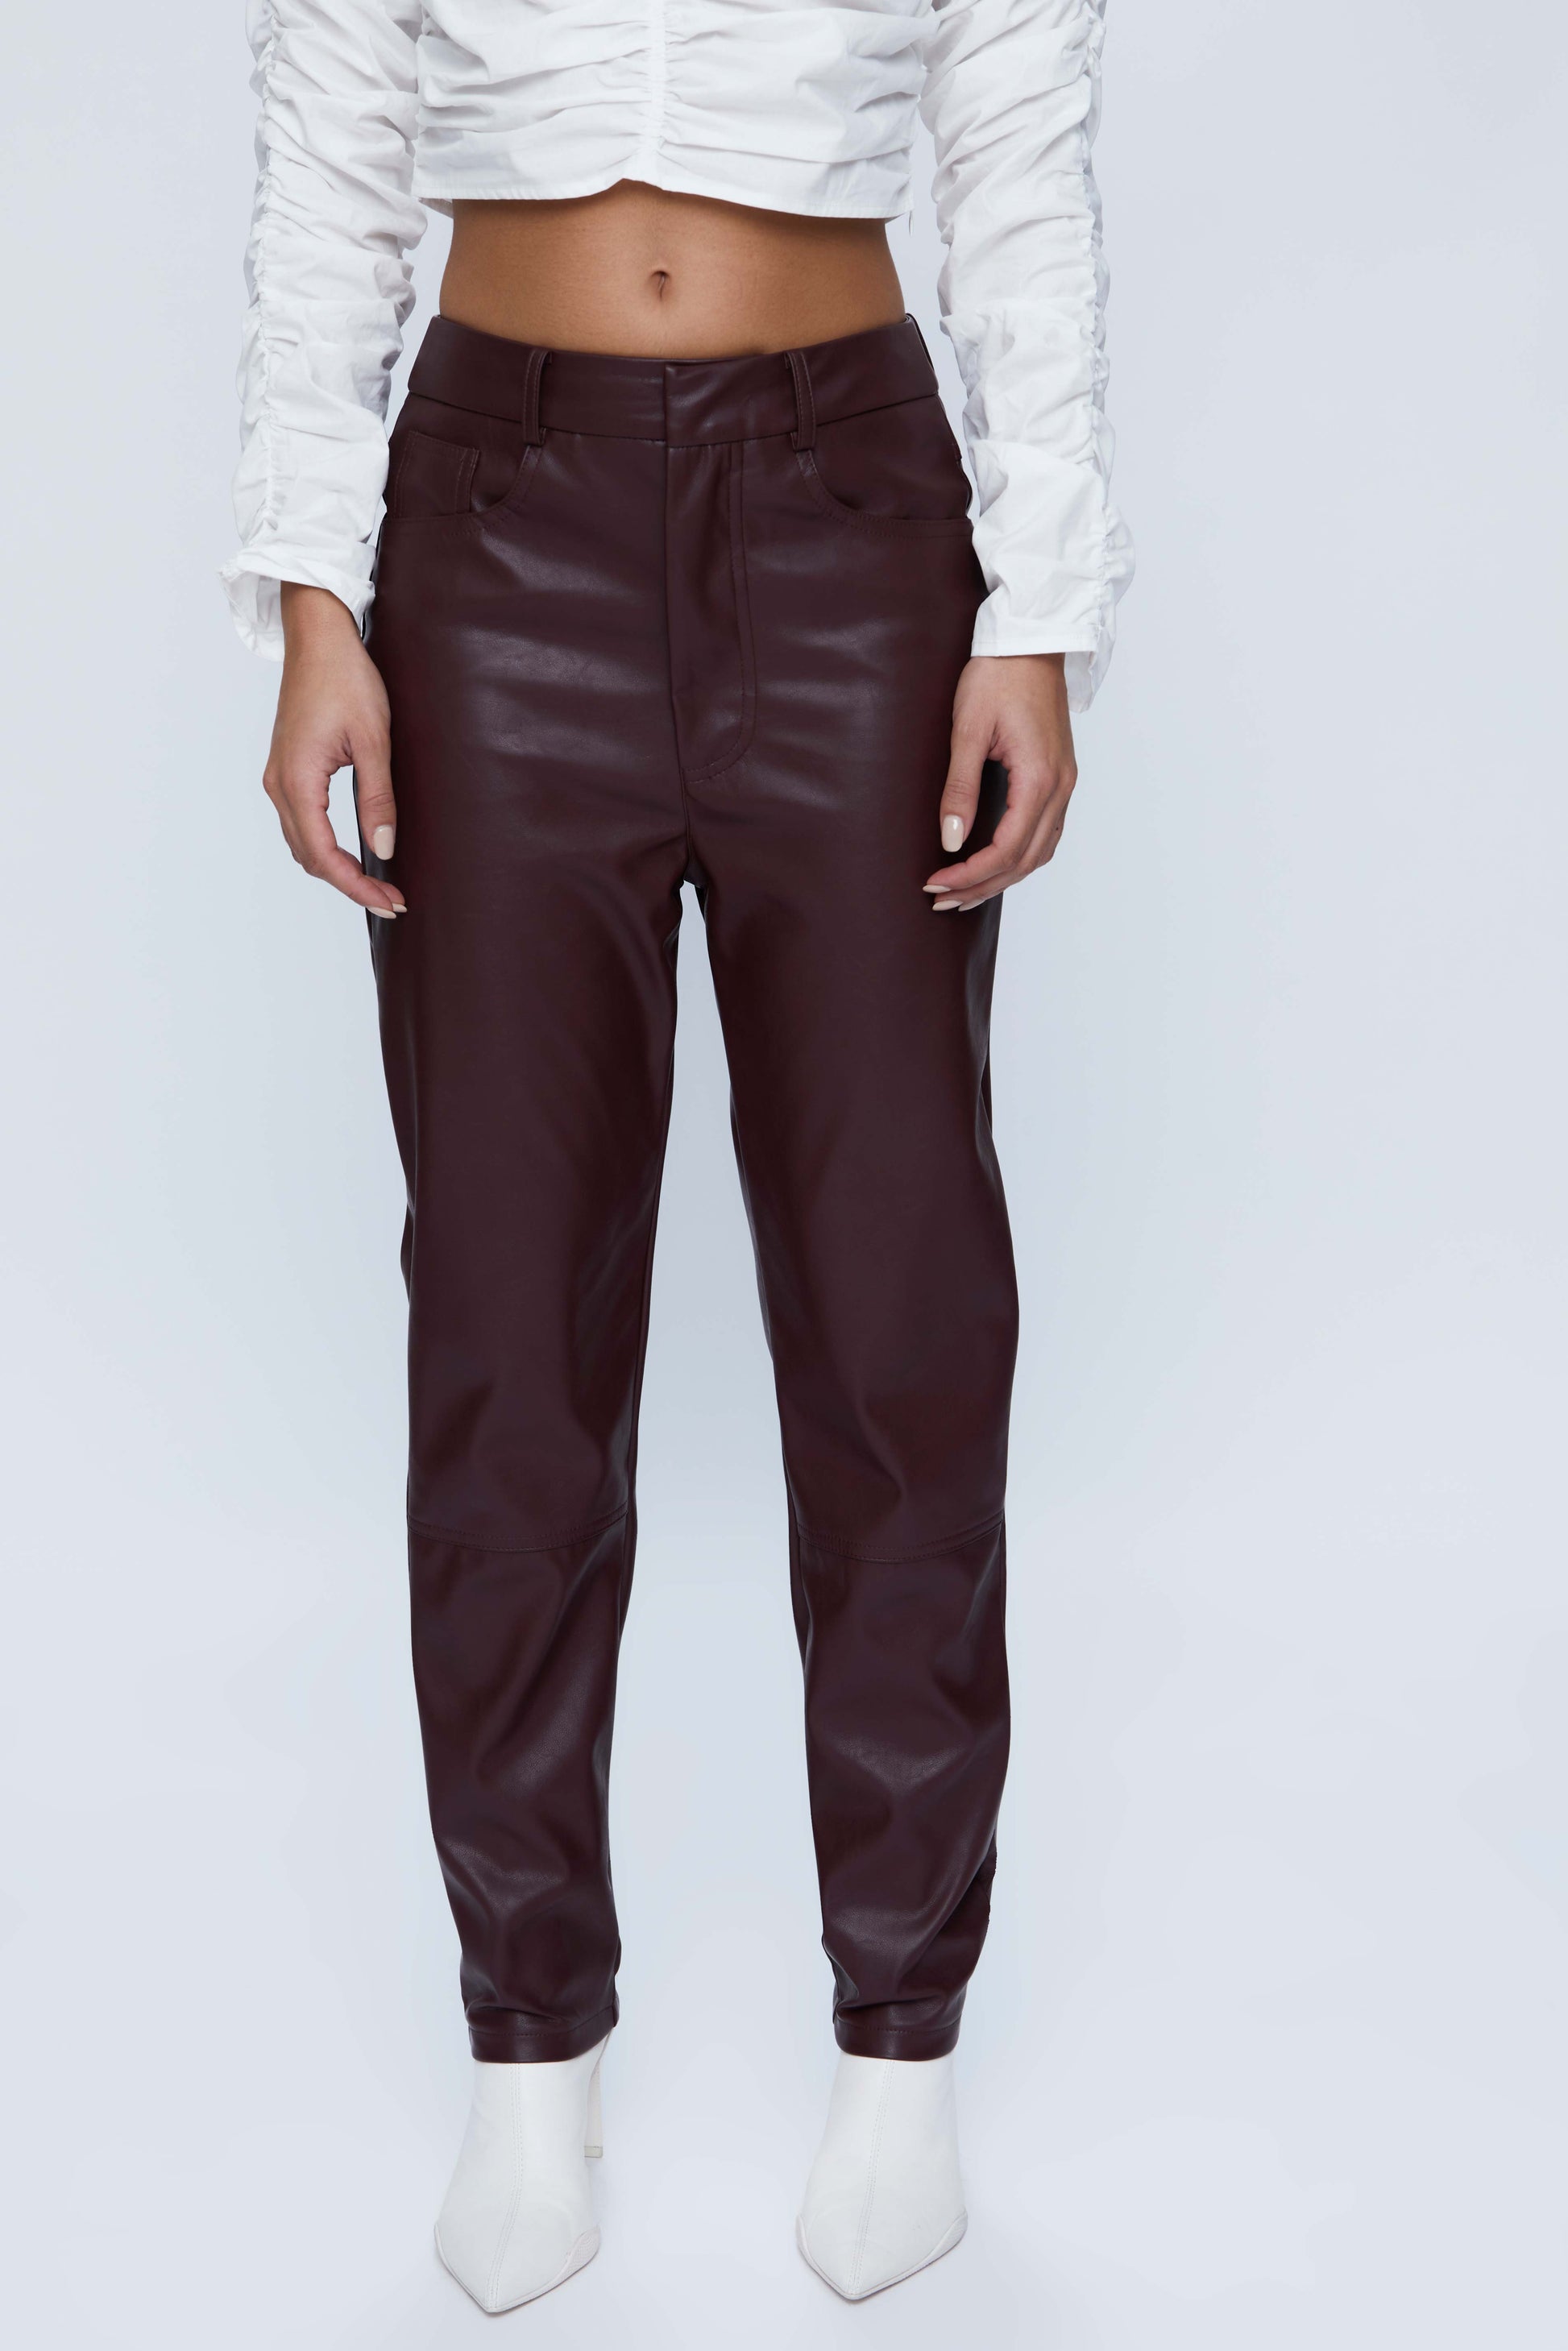 Long straight maroon faux leather pants - Wild Pony